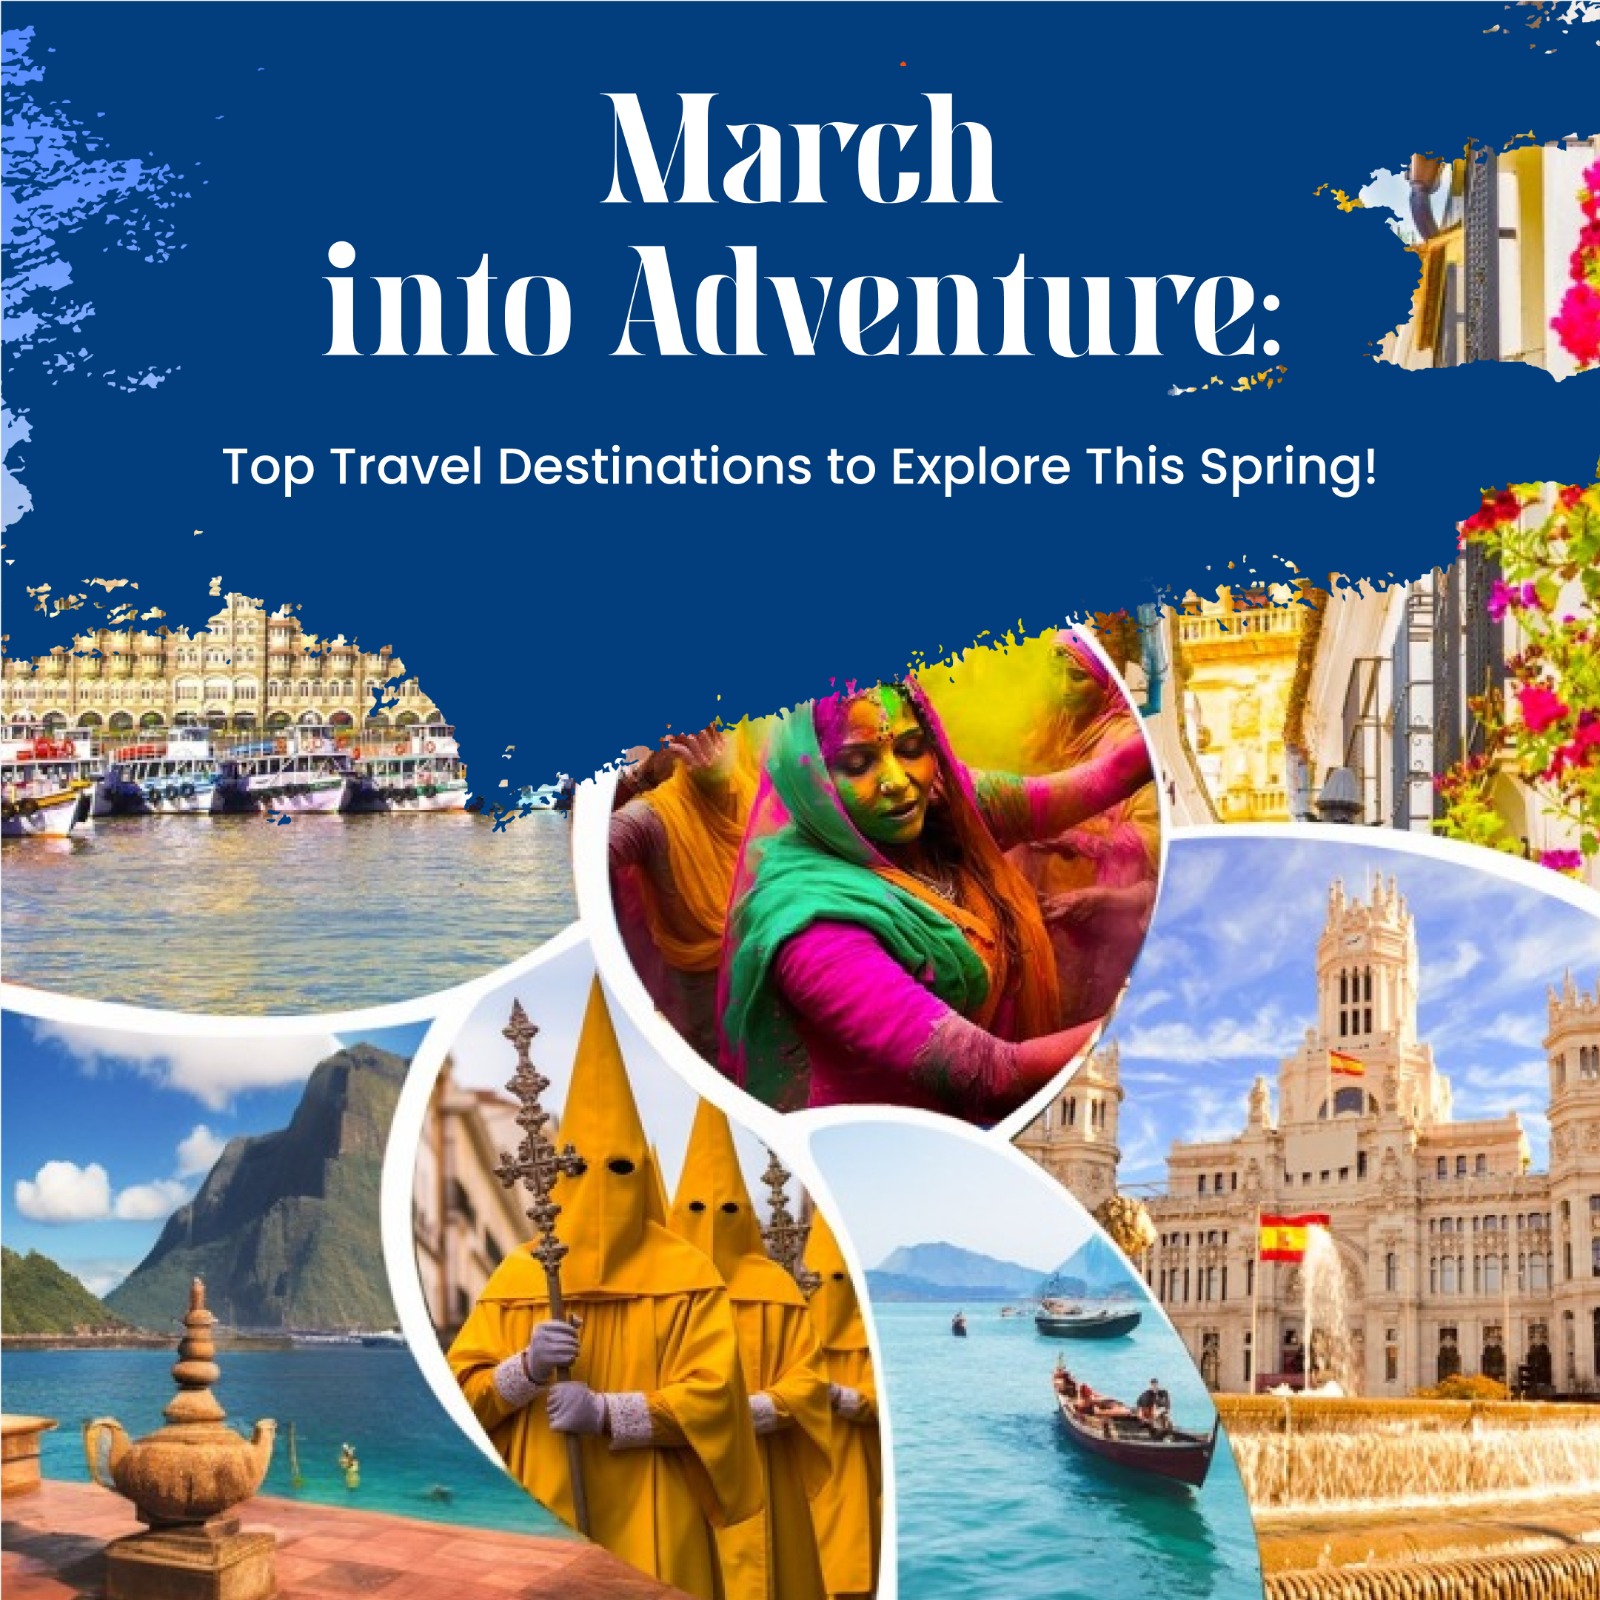 March into Adventure: Top Travel Destinations to Explore This Spring!